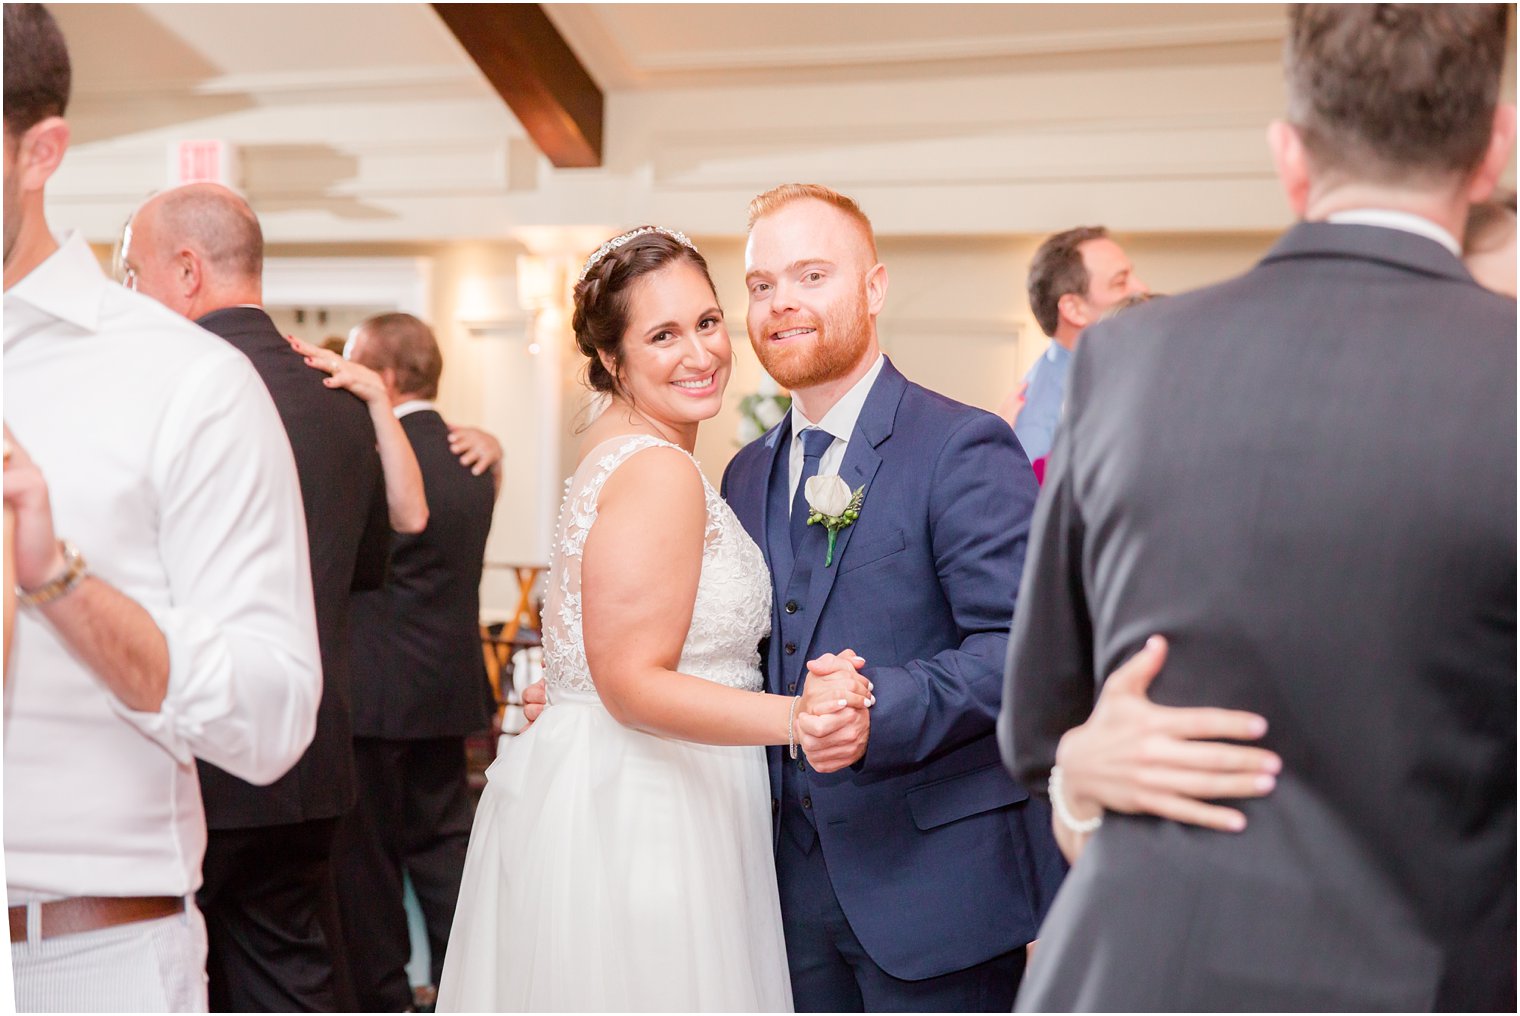 bride and groom dance during reception photographed by Idalia Photography